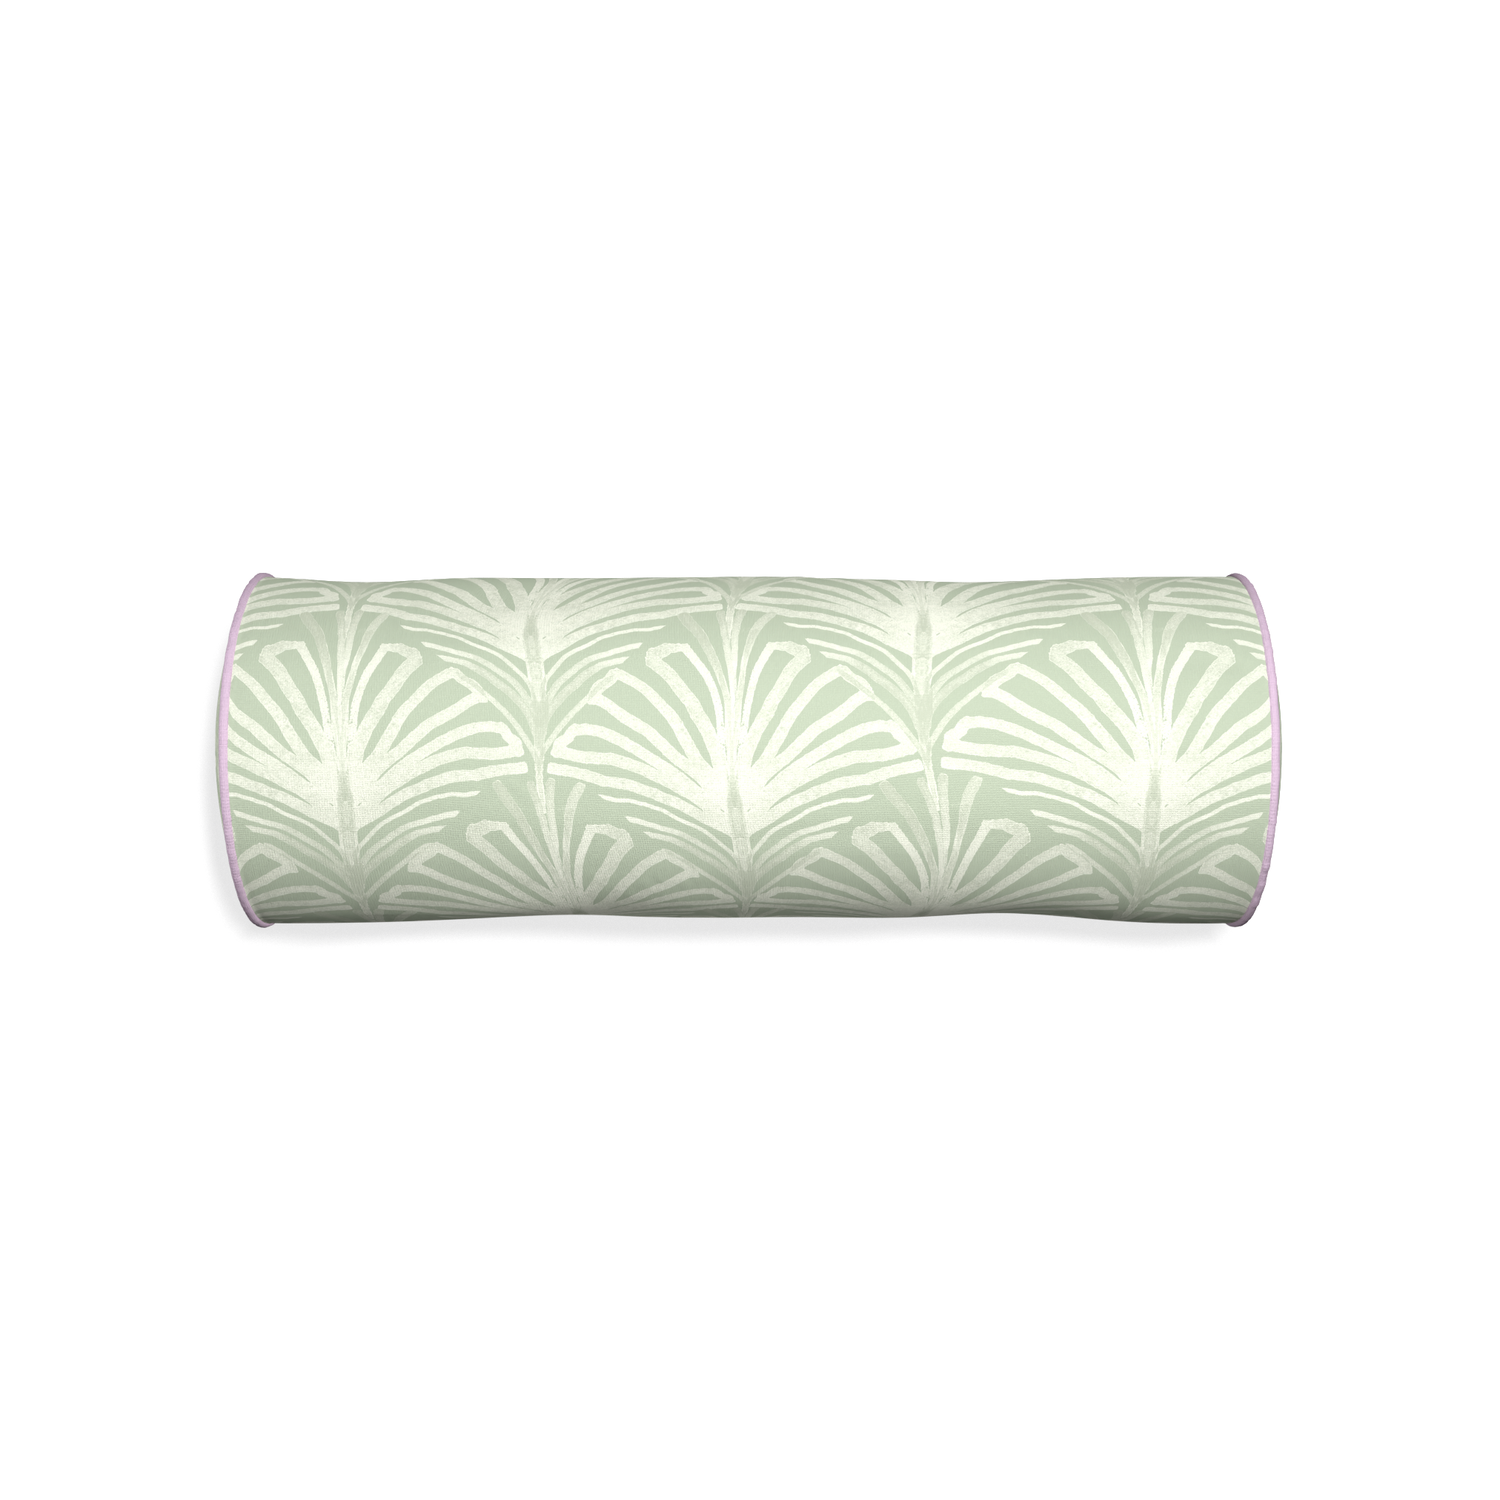 Bolster suzy sage custom sage green palmpillow with l piping on white background